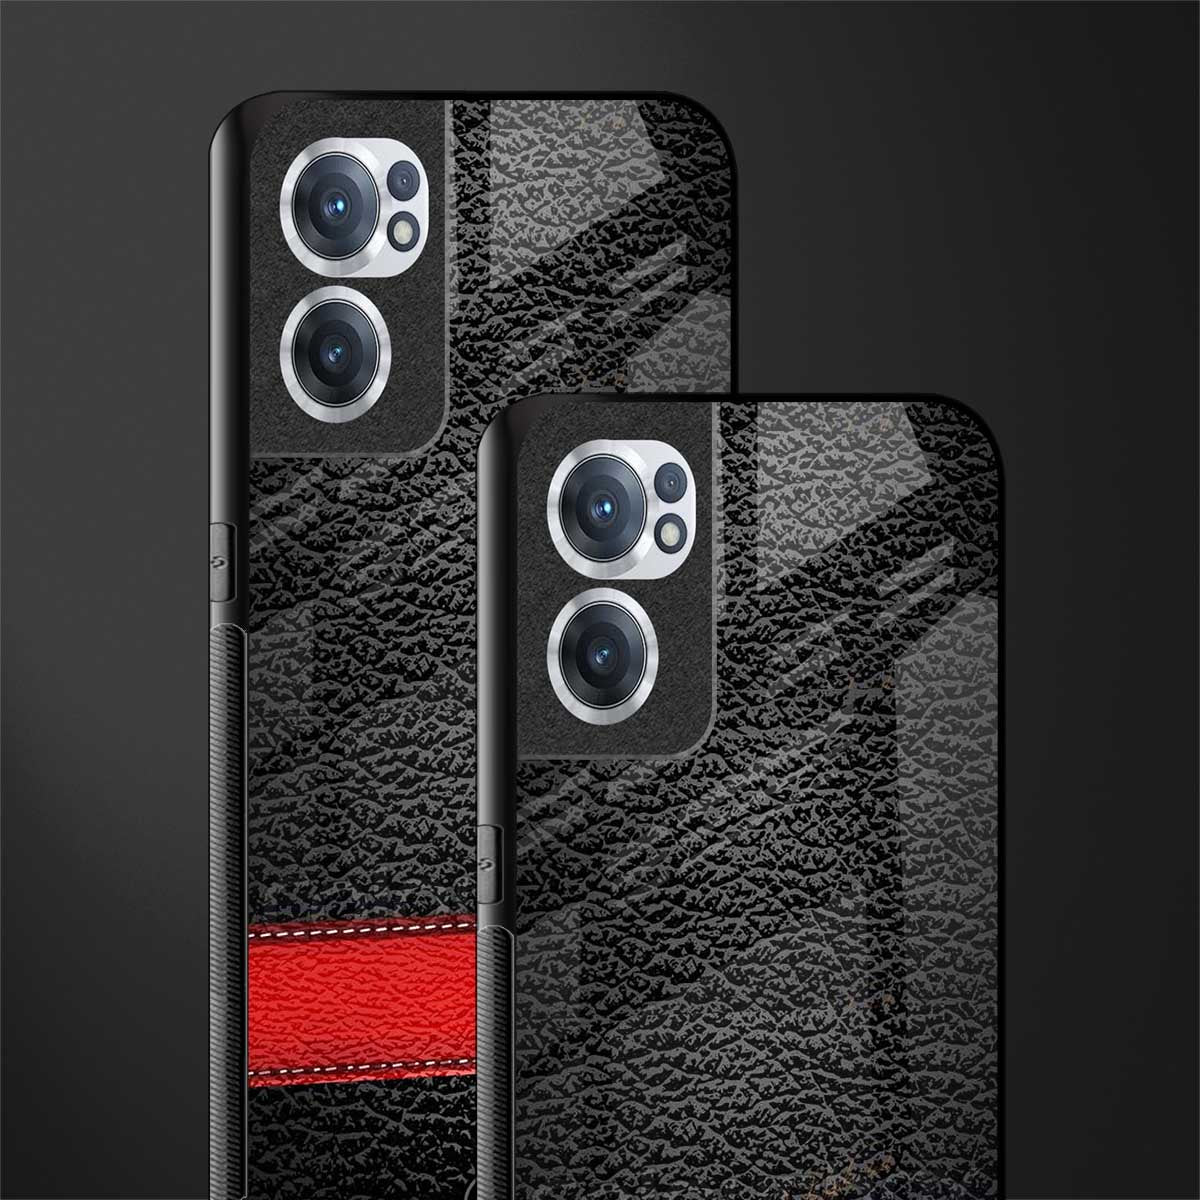 reaper's touch glass case for oneplus nord ce 2 5g image-2